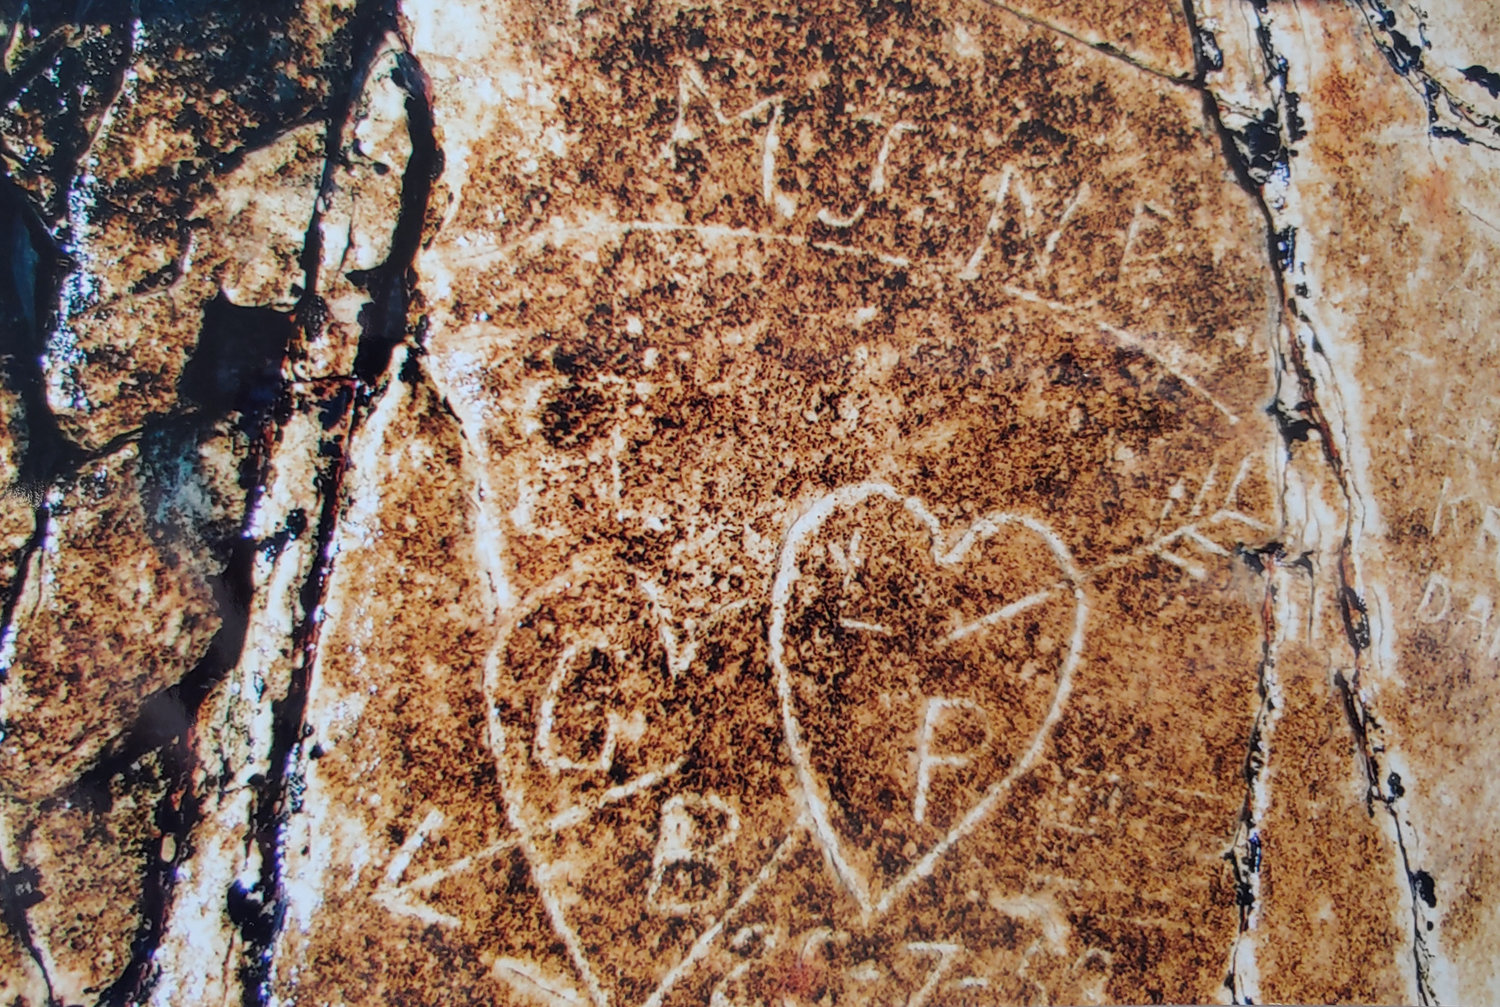 Initials George carved into rock at Brantevik are pictured.